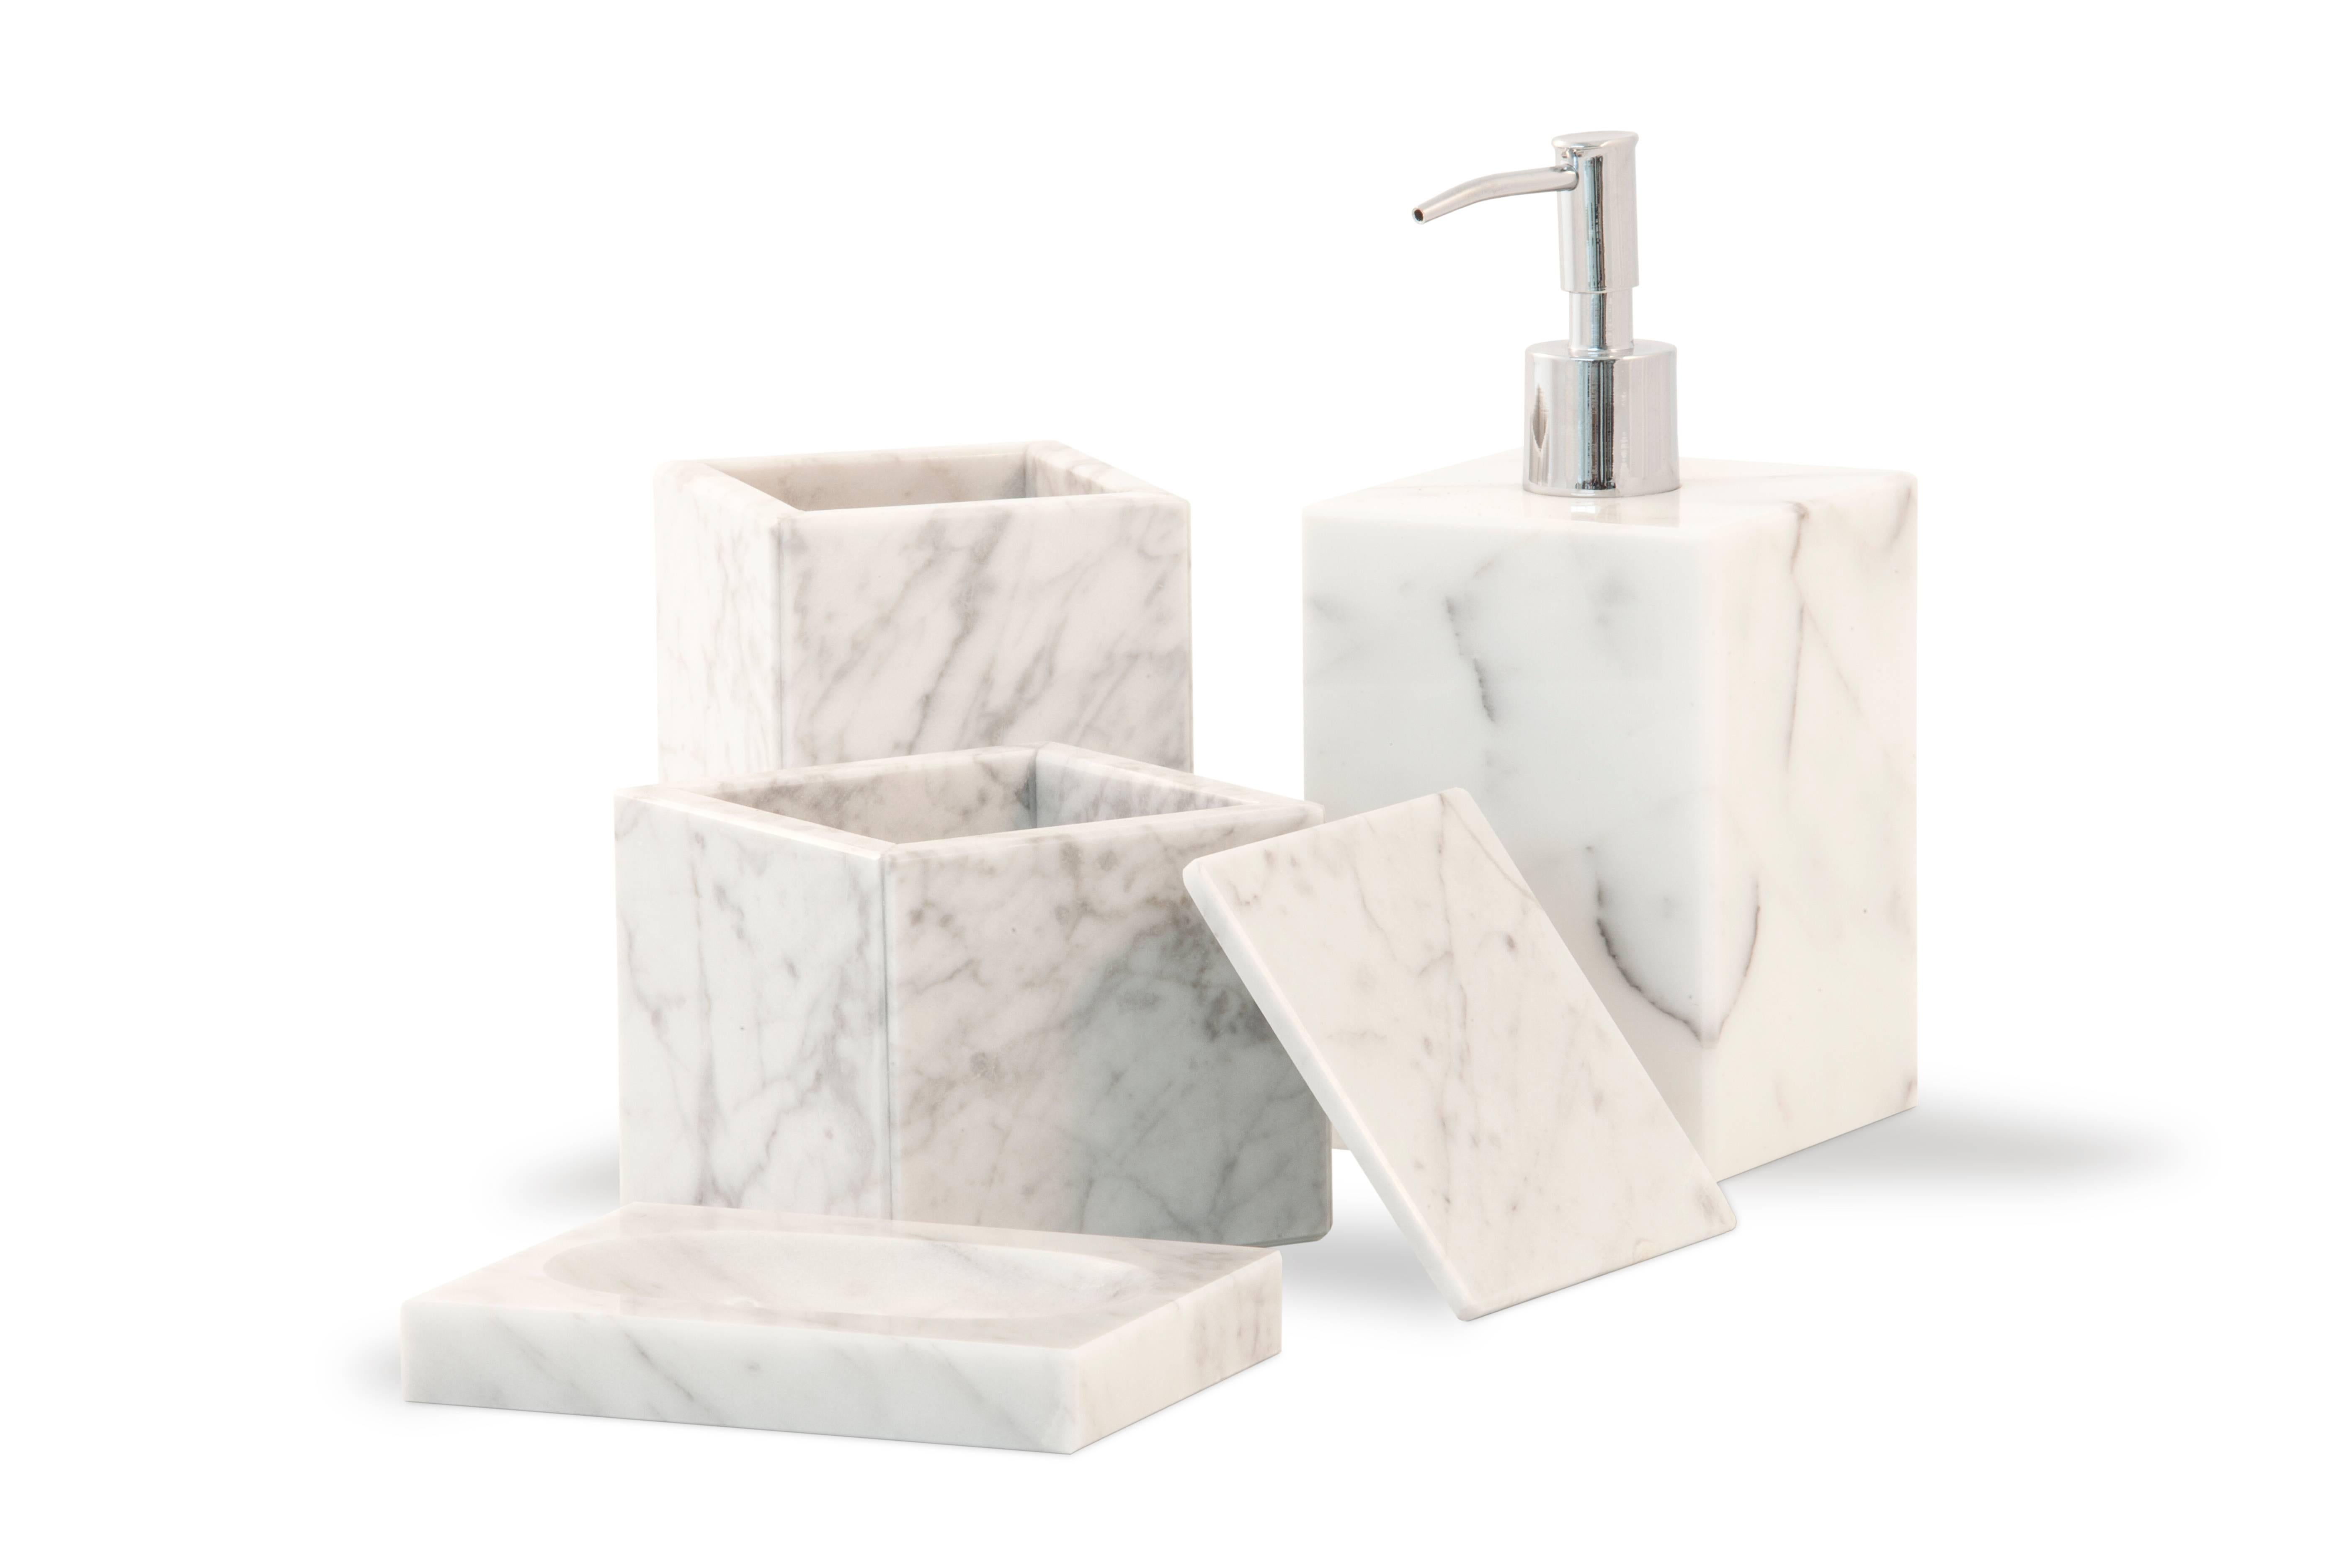 Squared shape soap dispenser in white Carrara marble with dispenser pump in stainless steel.
Each piece is in a way unique (since each marble block is different in veins and shades) and handcrafted in Italy. Slight variations in shape, color and